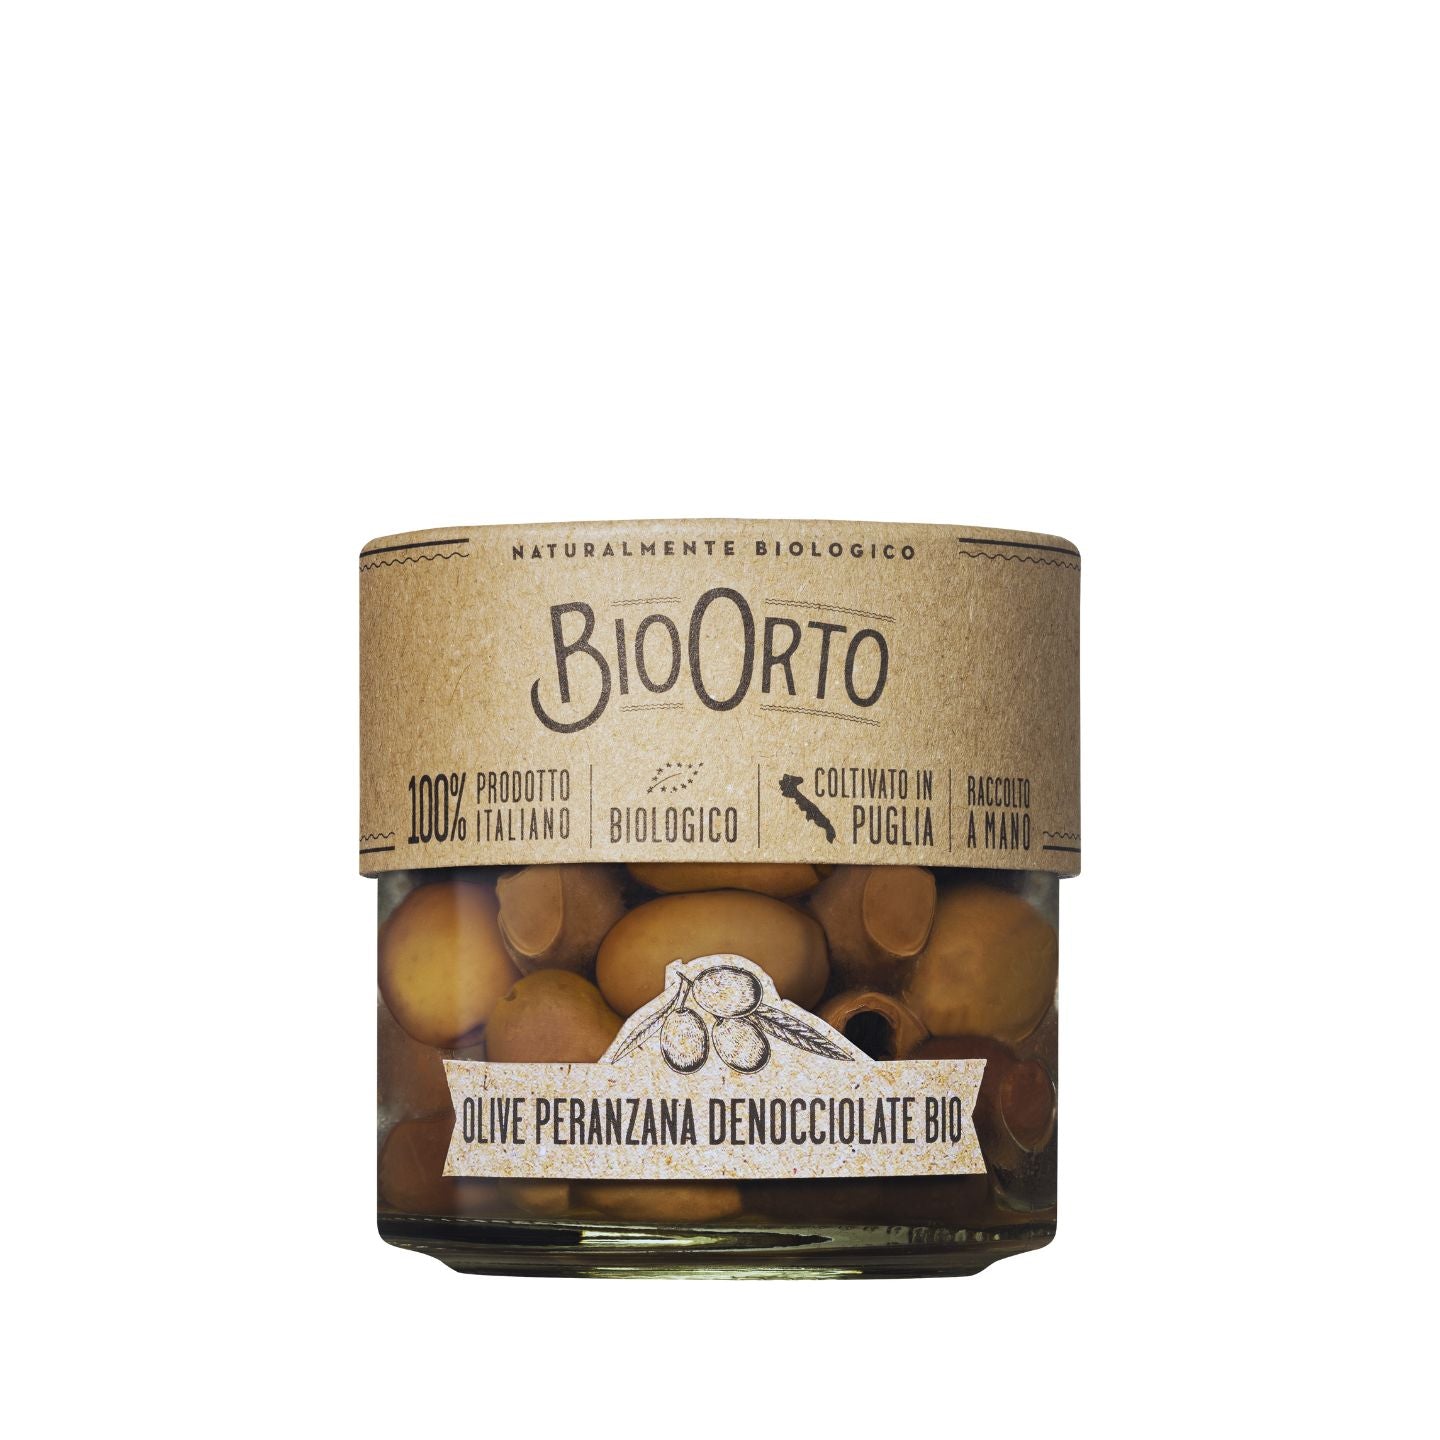 Bio Orto Organic Pitted Peranzana Olives in Extra Virgin Olive Oil 190g  | Imported and distributed in the UK by Just Gourmet Foods